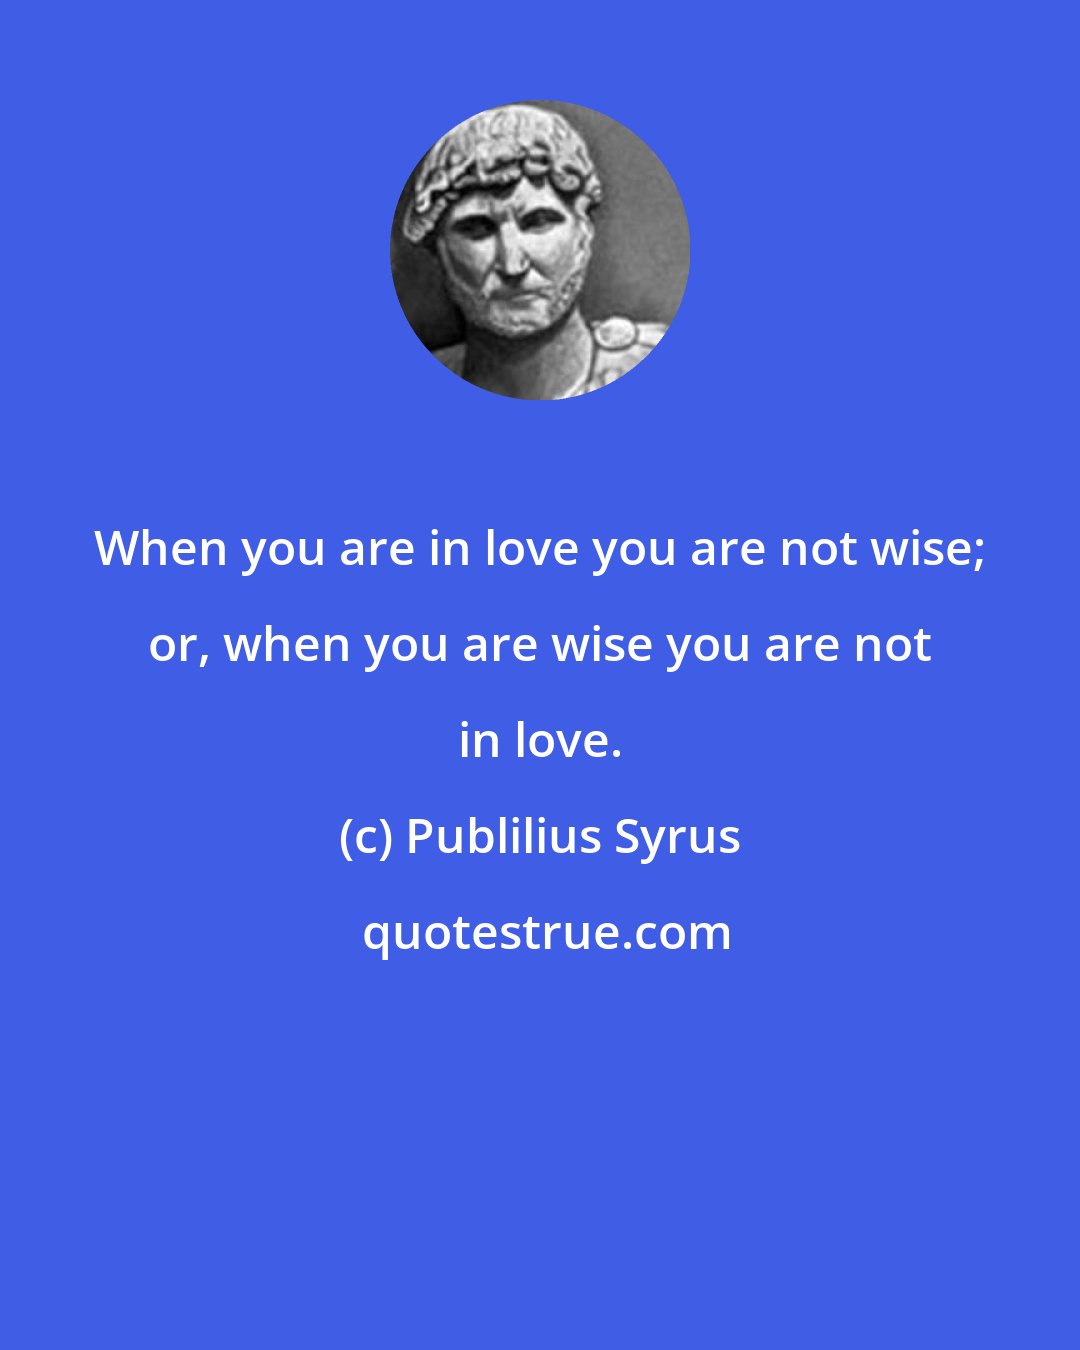 Publilius Syrus: When you are in love you are not wise; or, when you are wise you are not in love.